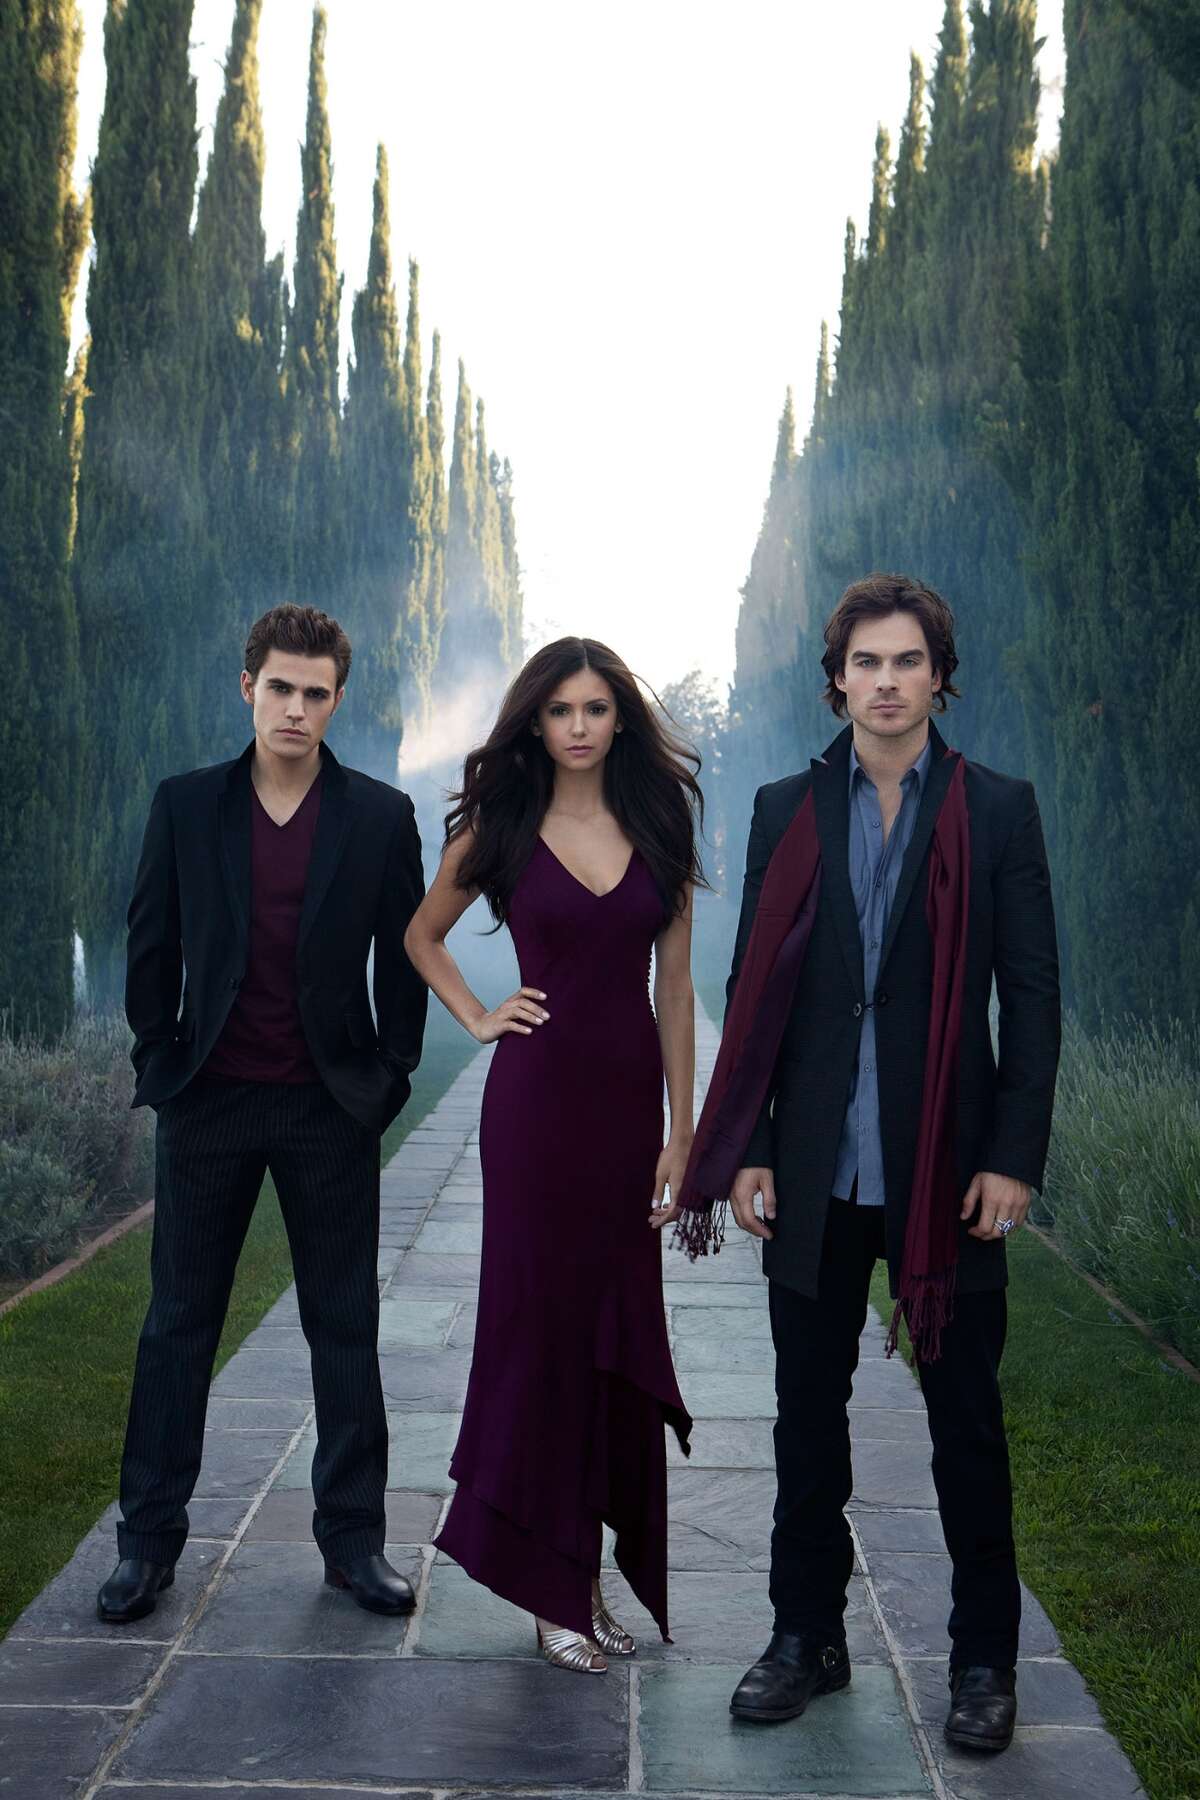 Ian Somerhalder (right) stars with Paul Wesley and Nina Dobrev in “The Vampire Diaries.”